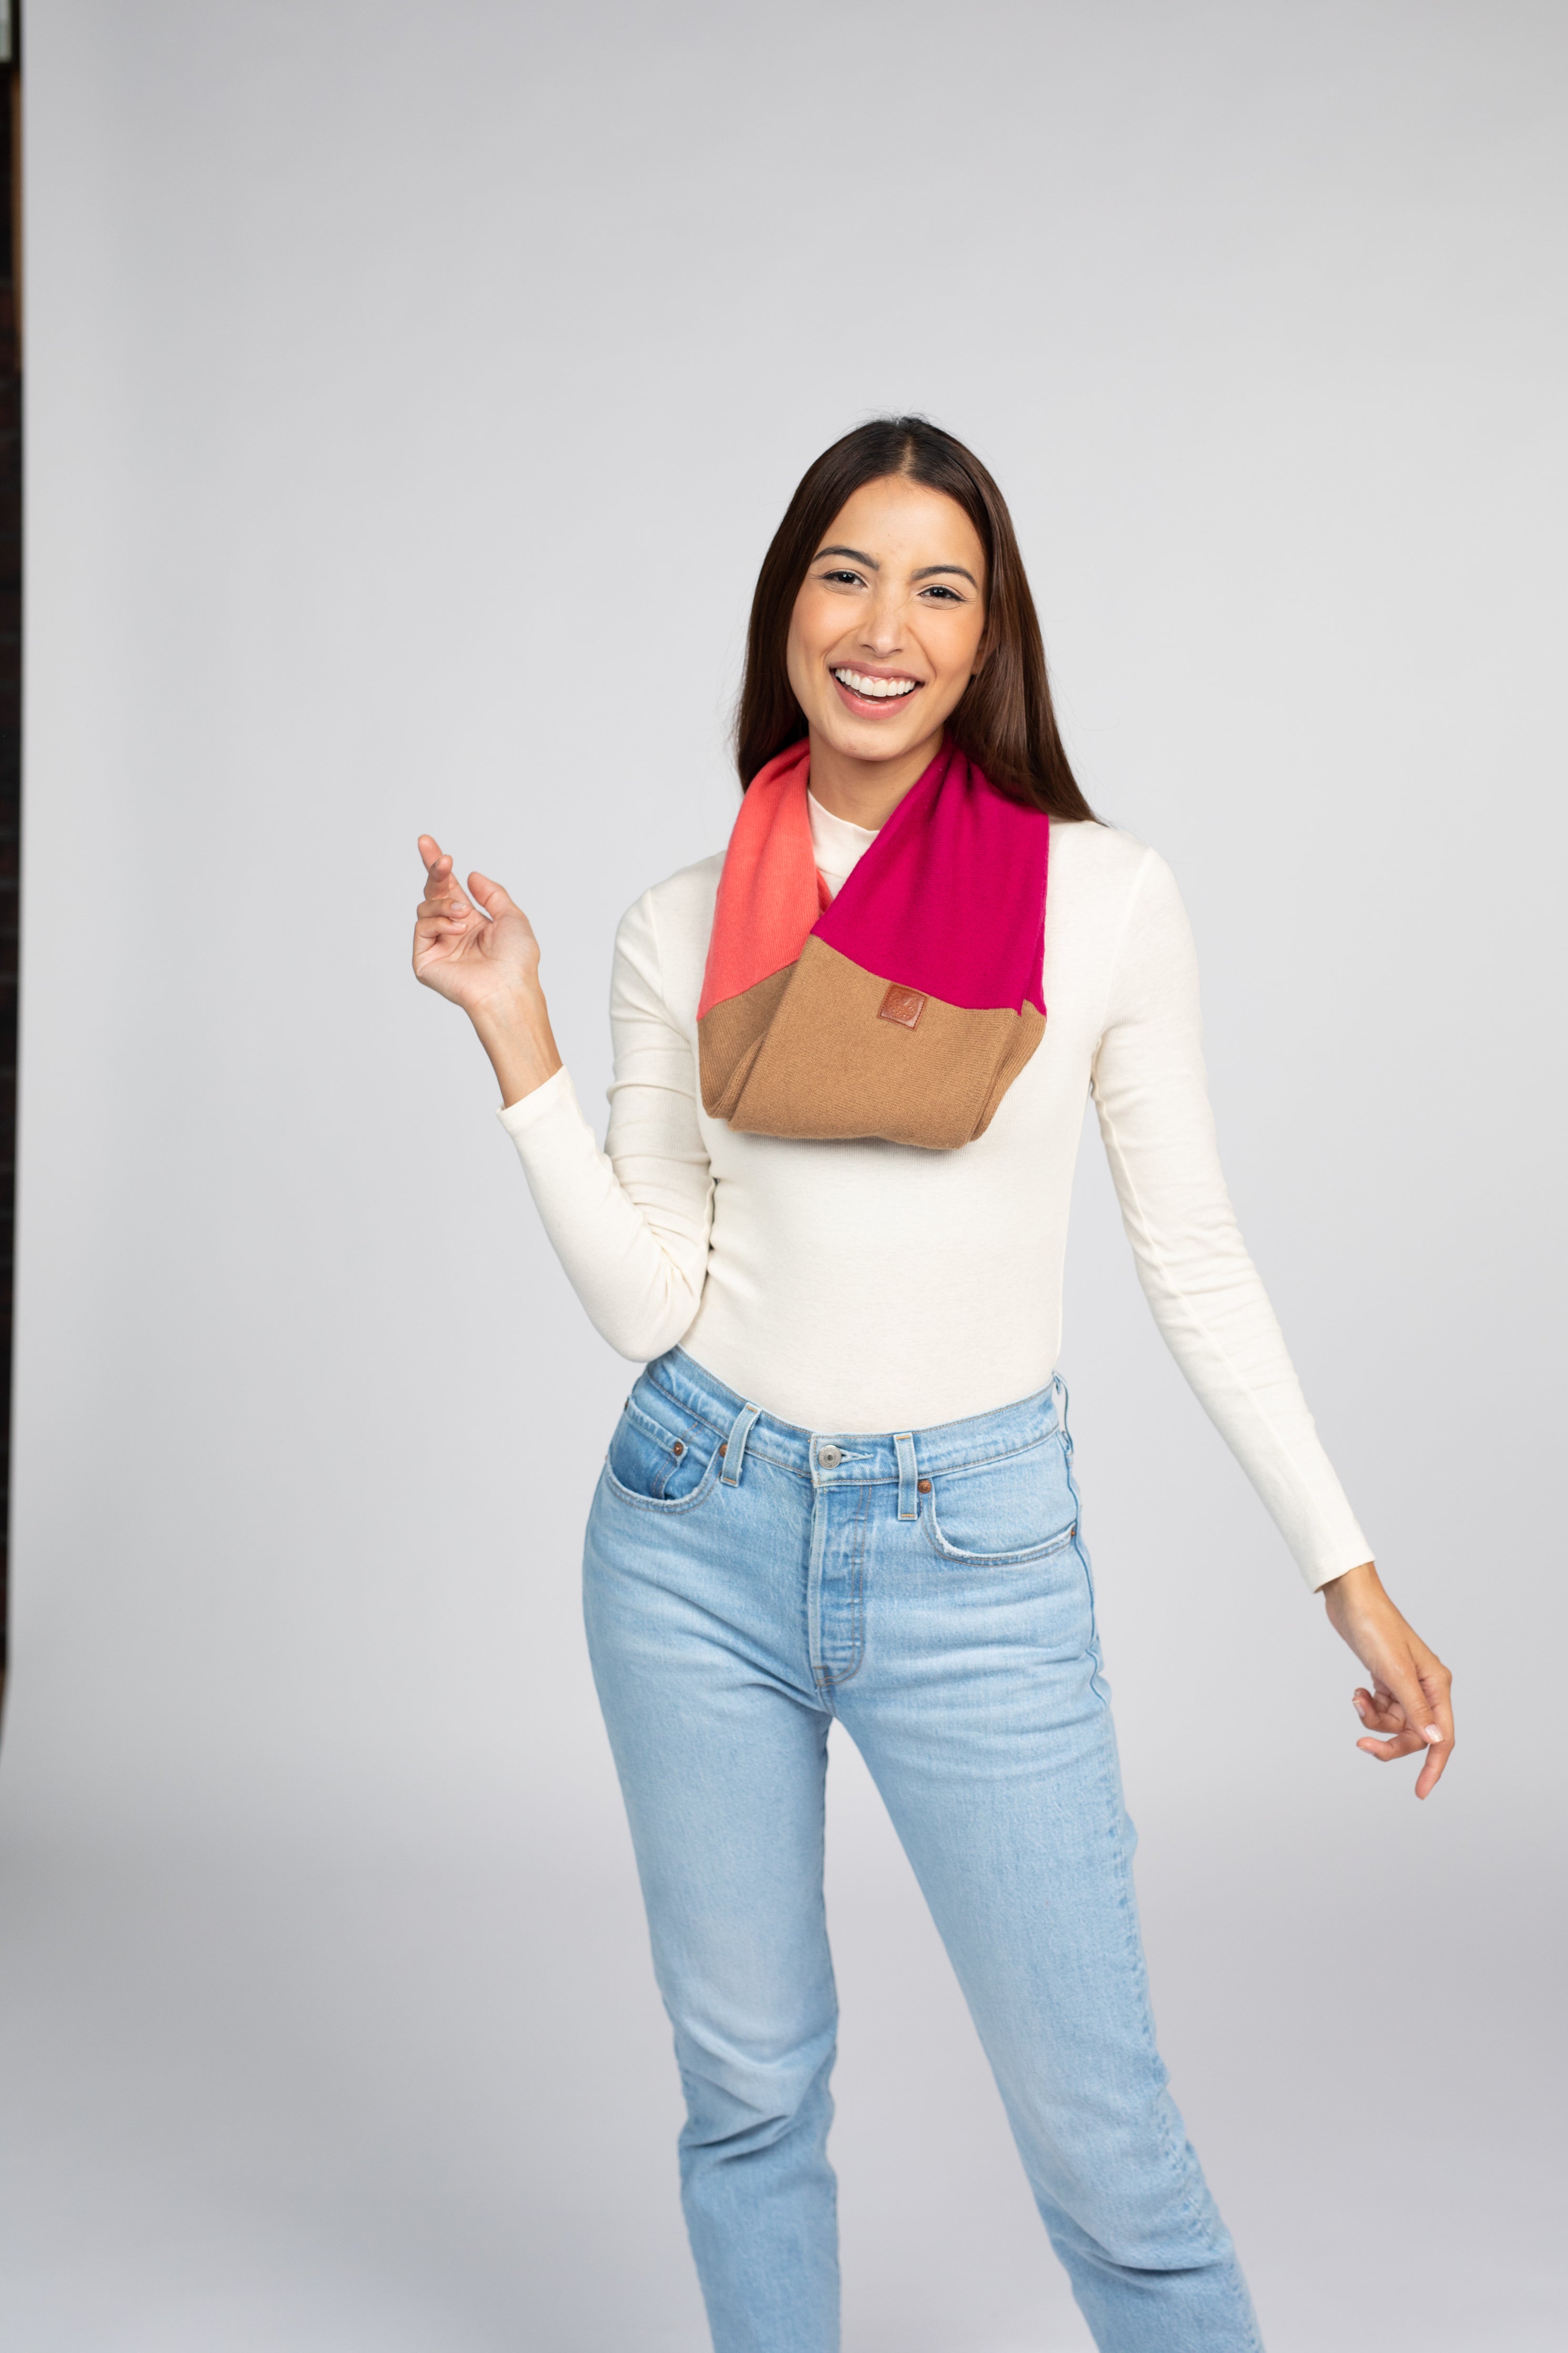 Orange and Pink - Cashmere Infinity Scarf for Women